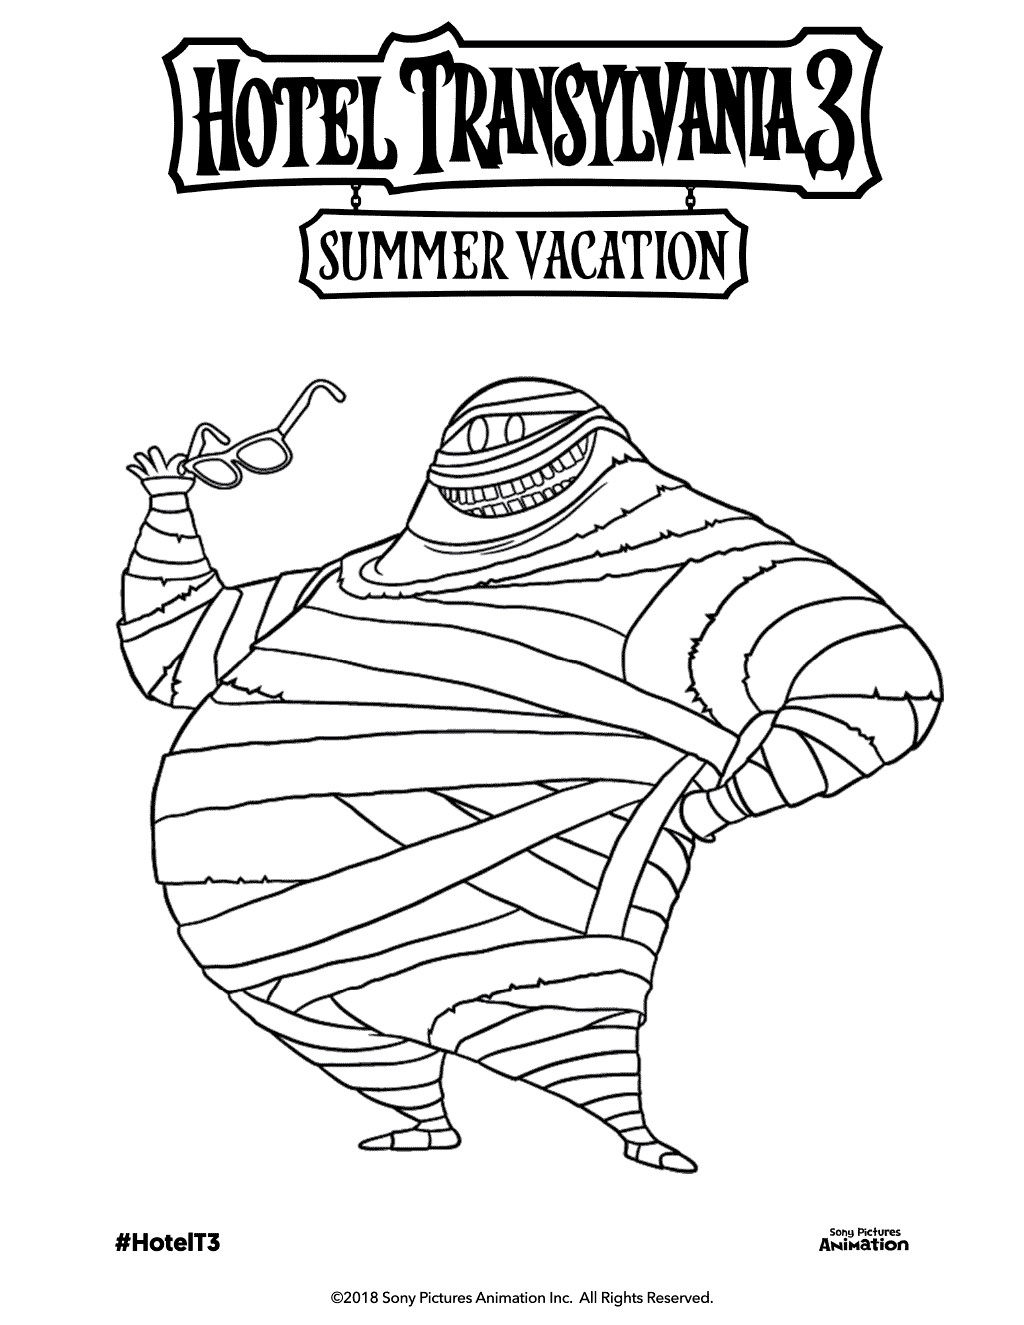 Hotel Transylvania 3 Coloring Pages
 Free Printable Hotel Transylvania 3 Coloring Pages